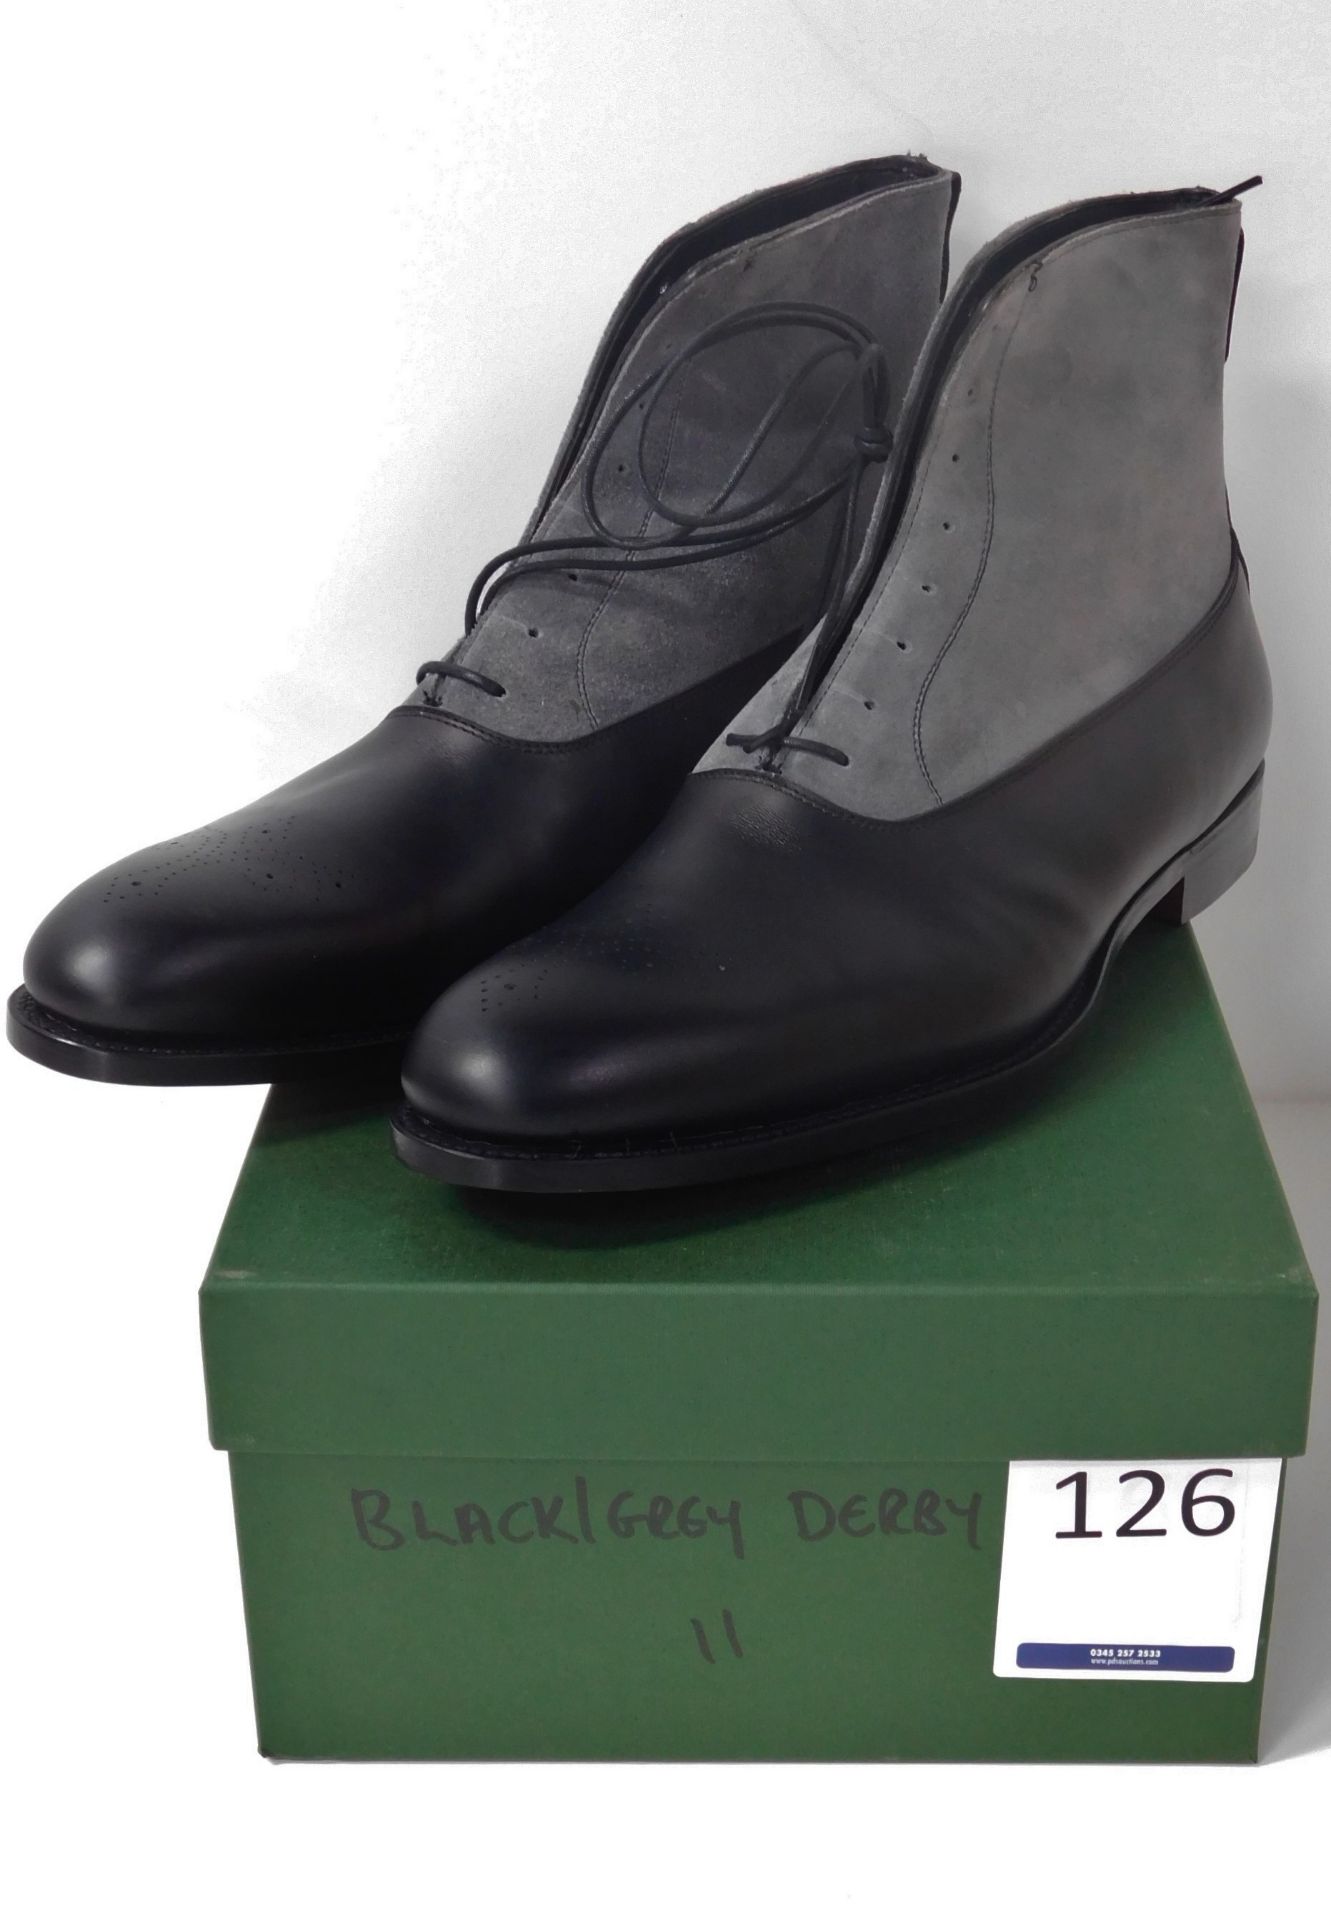 Pair of Alfred Sargent Brogue Gusset Boots, Size 11 (Slight Seconds) (Location: Brentwood - See